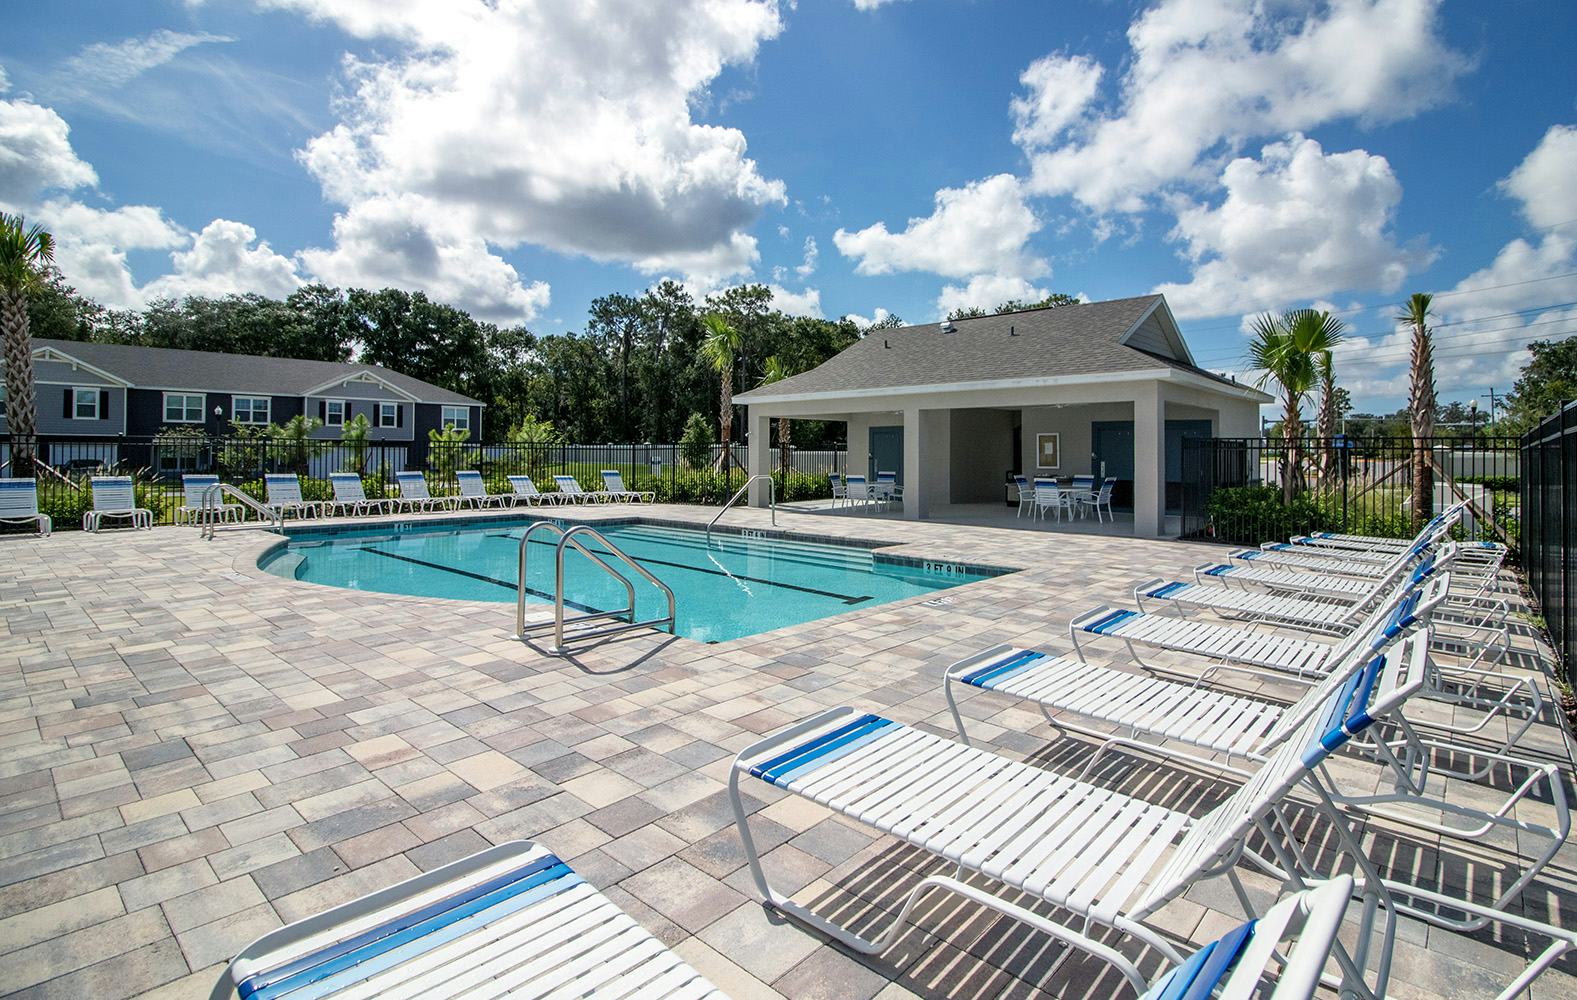 Pool amenity in a townhome community